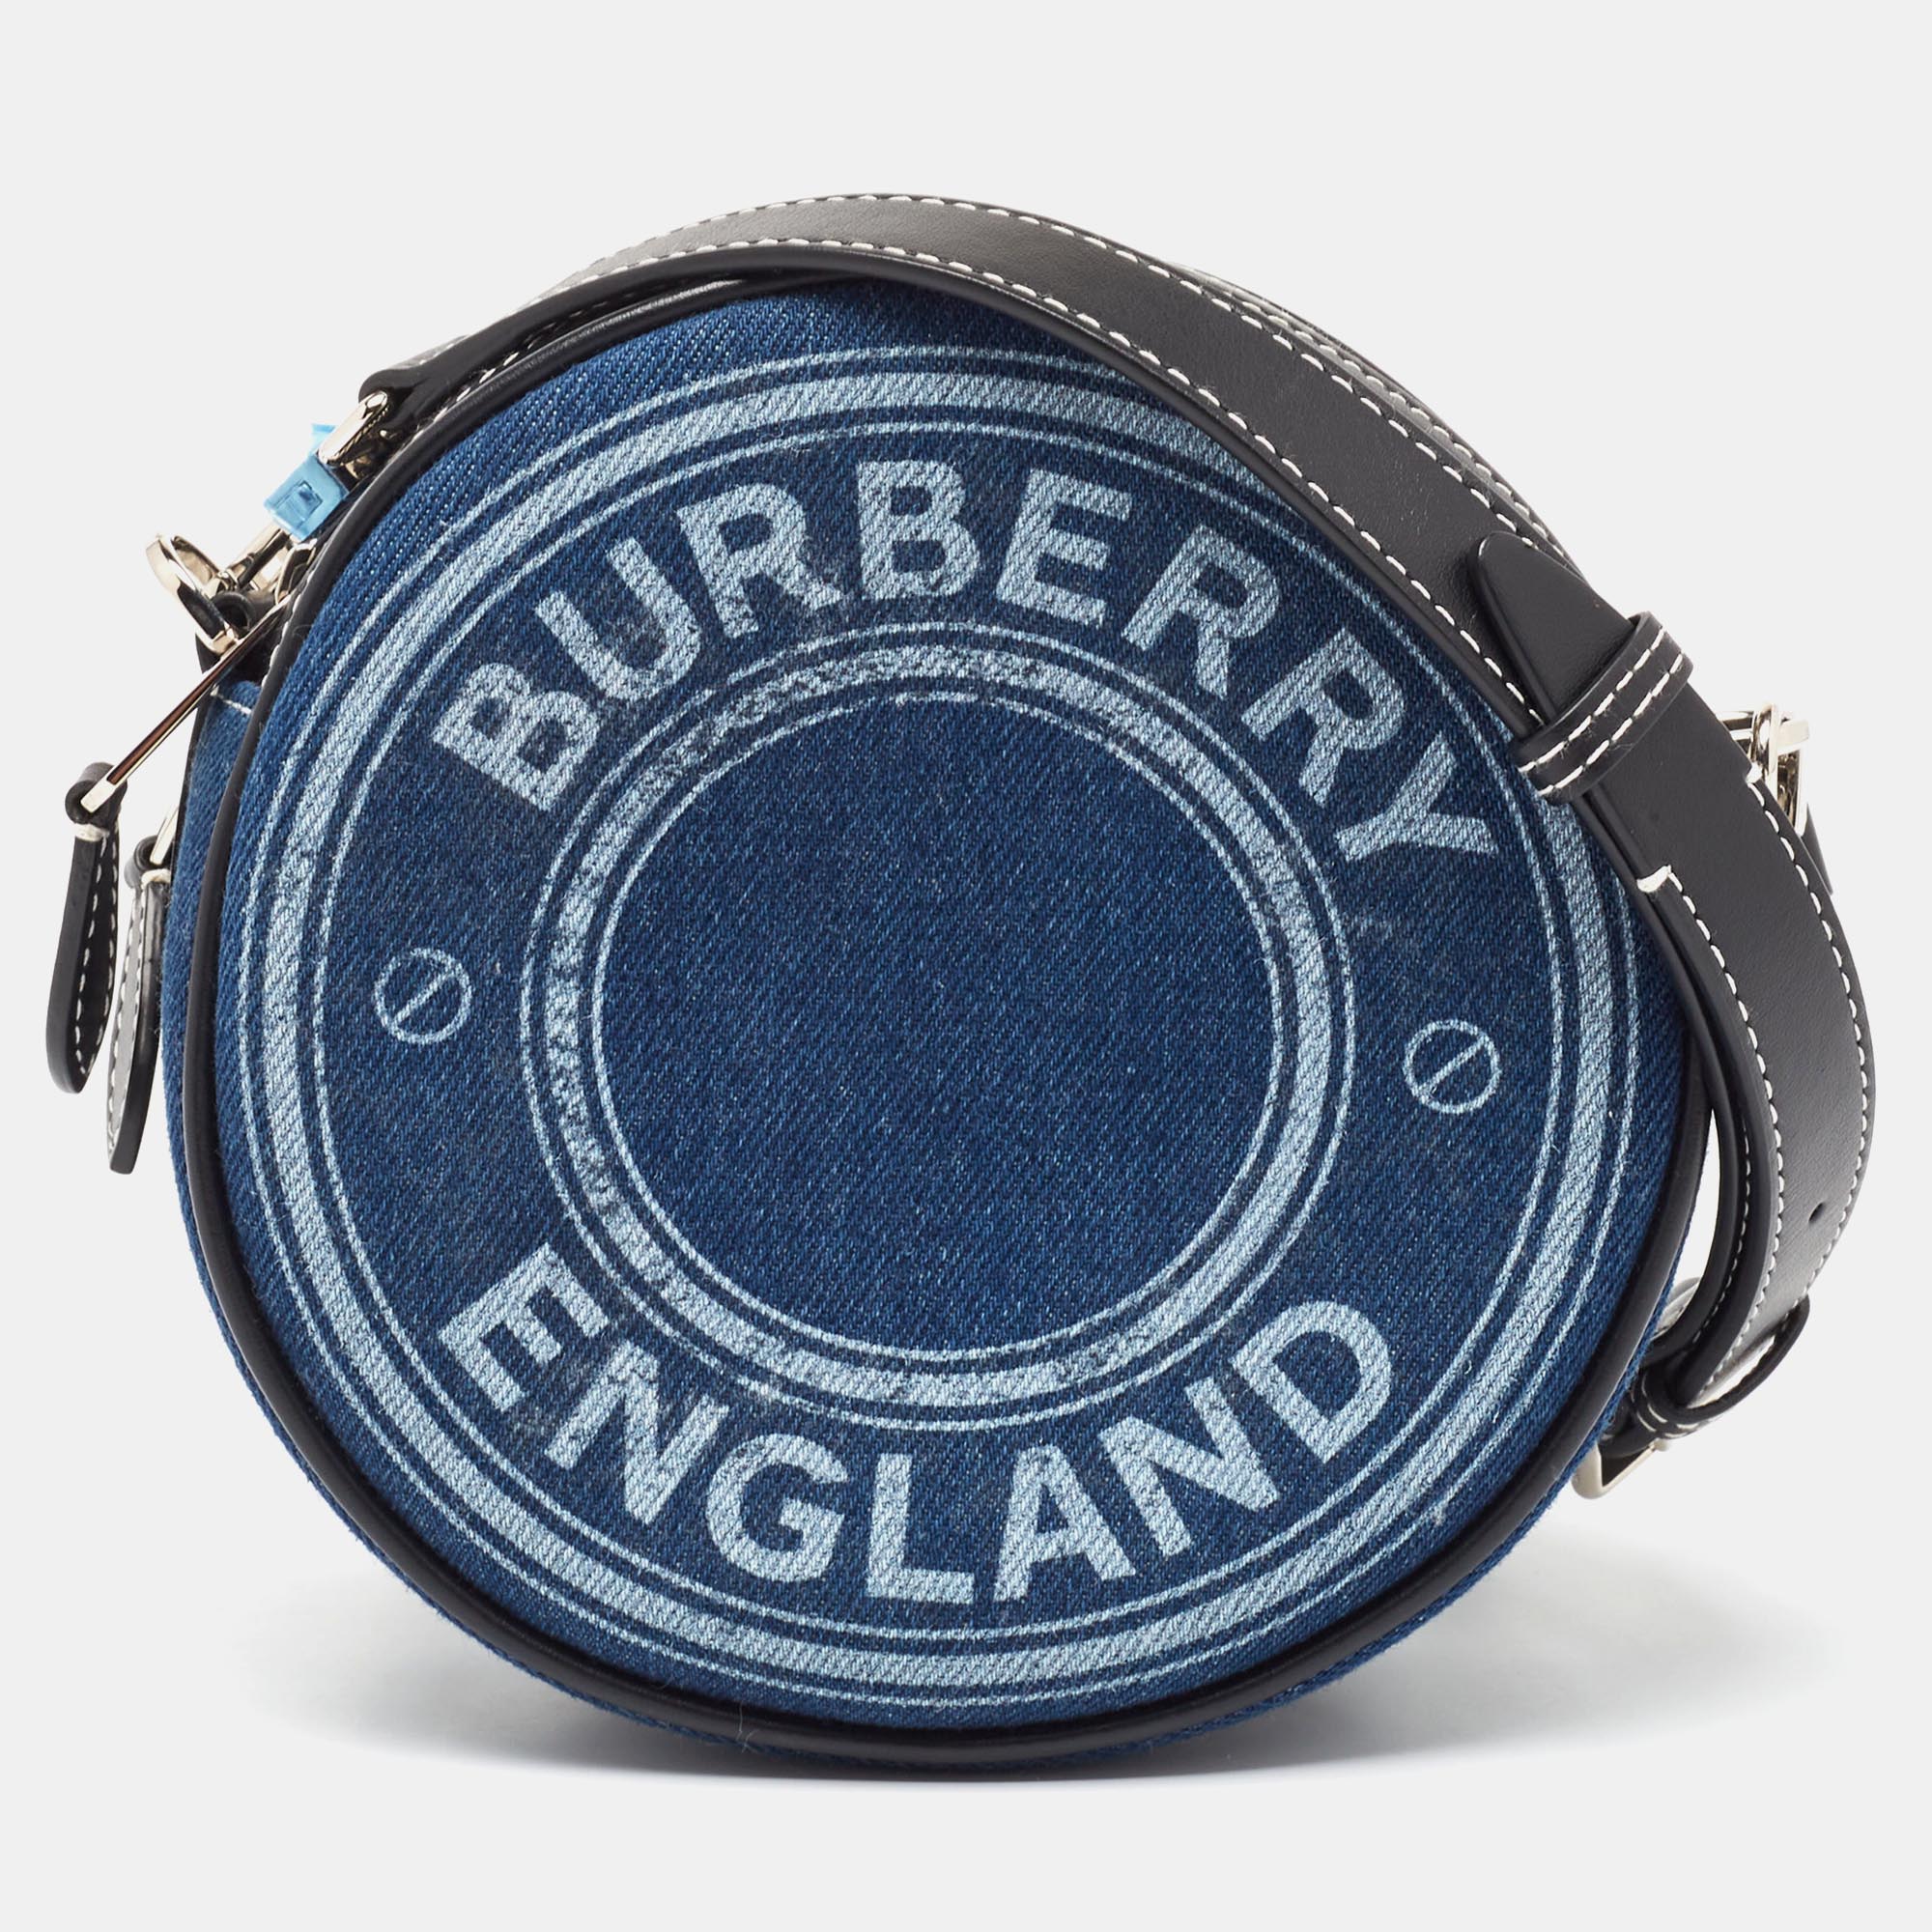 Burberry blue/black denim and leather louise round crossbody bag